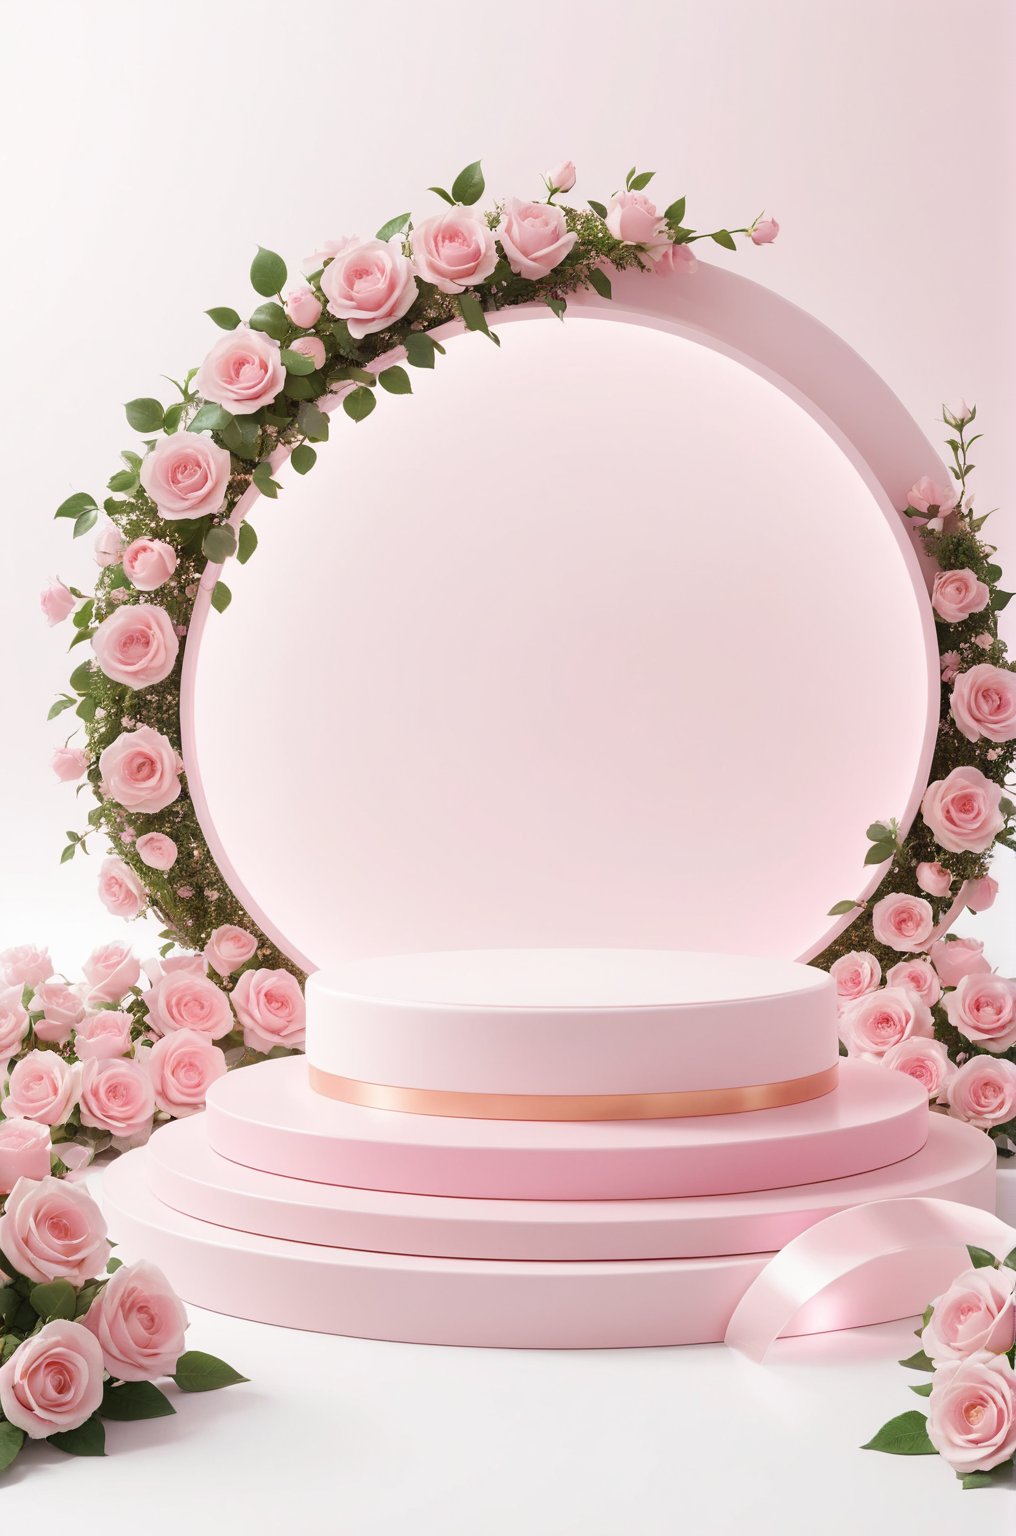 3D\(hubgstyle)\,
a round podium on the ground in the middle, white background, lots of pink roses, 

professional 3d model, anime artwork pixar, 3d style, good shine, OC rendering, highly detailed, volumetric, dramatic lighting, 